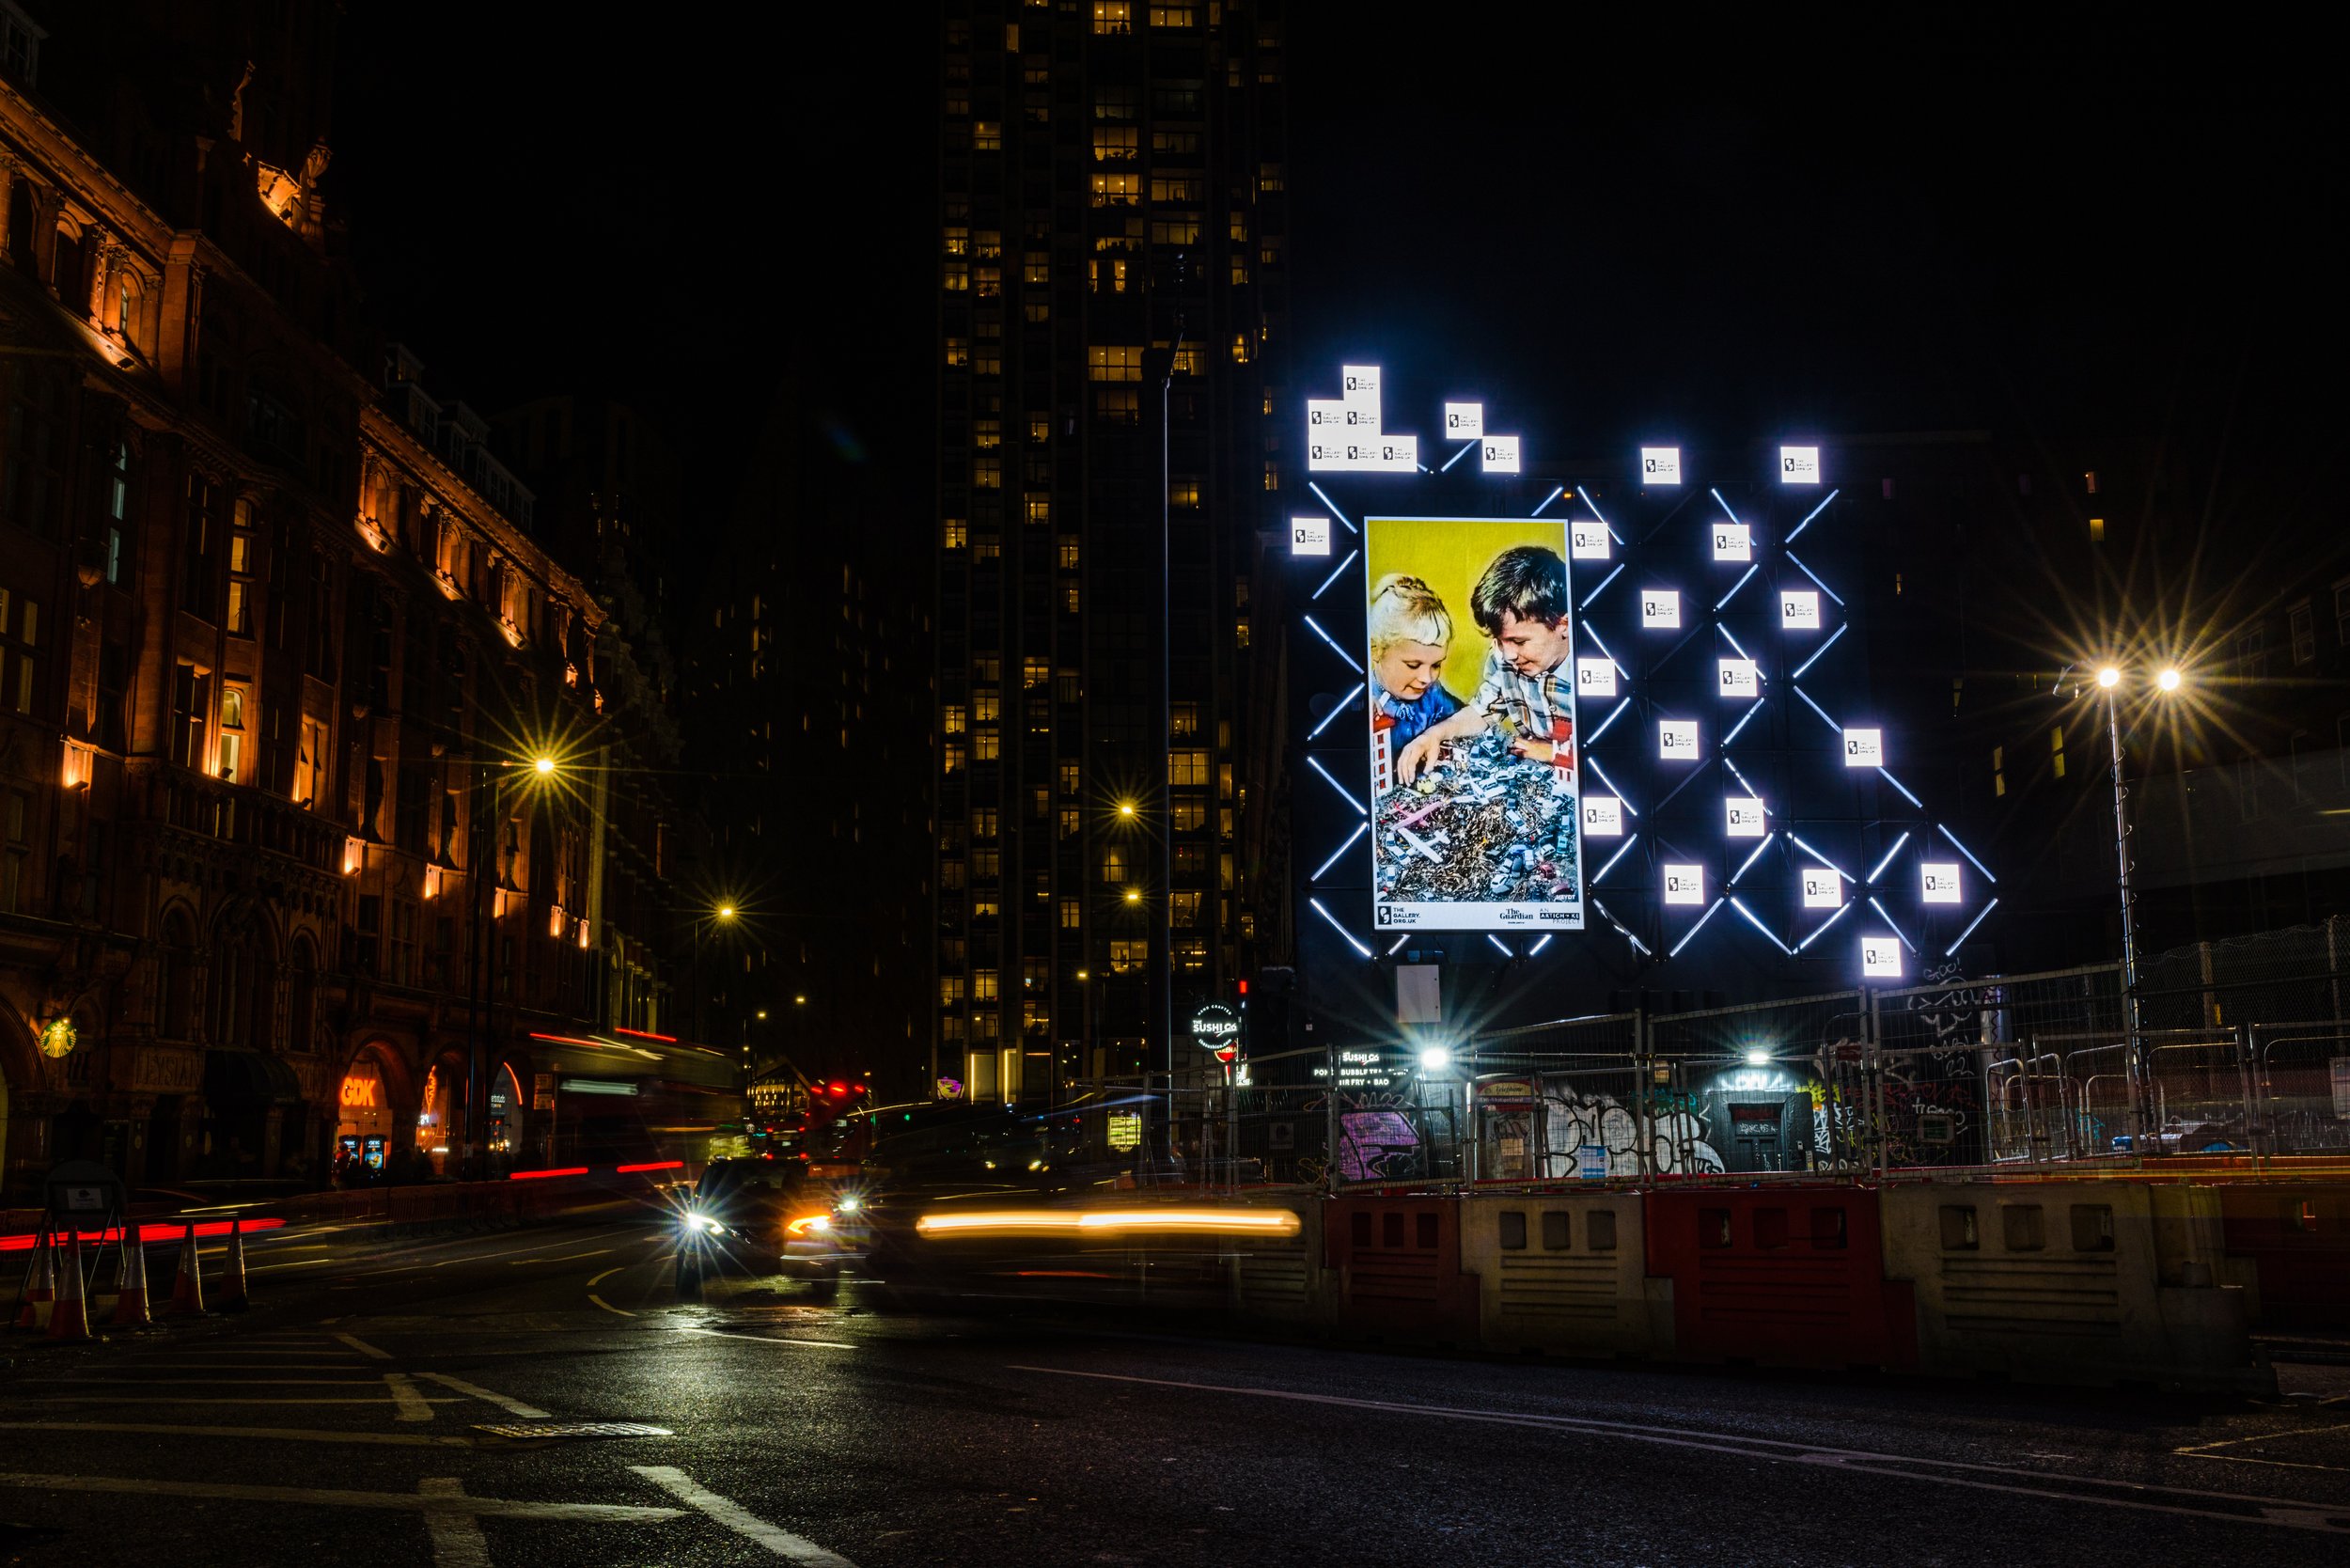 ‘Last to inherit’ (2020) by HEYDT. The Gallery, Season 2, 2023. Produced by Artichoke. Photo by Yves Salmon. Old Street Digital Canvas, London. Road view, night.JPG